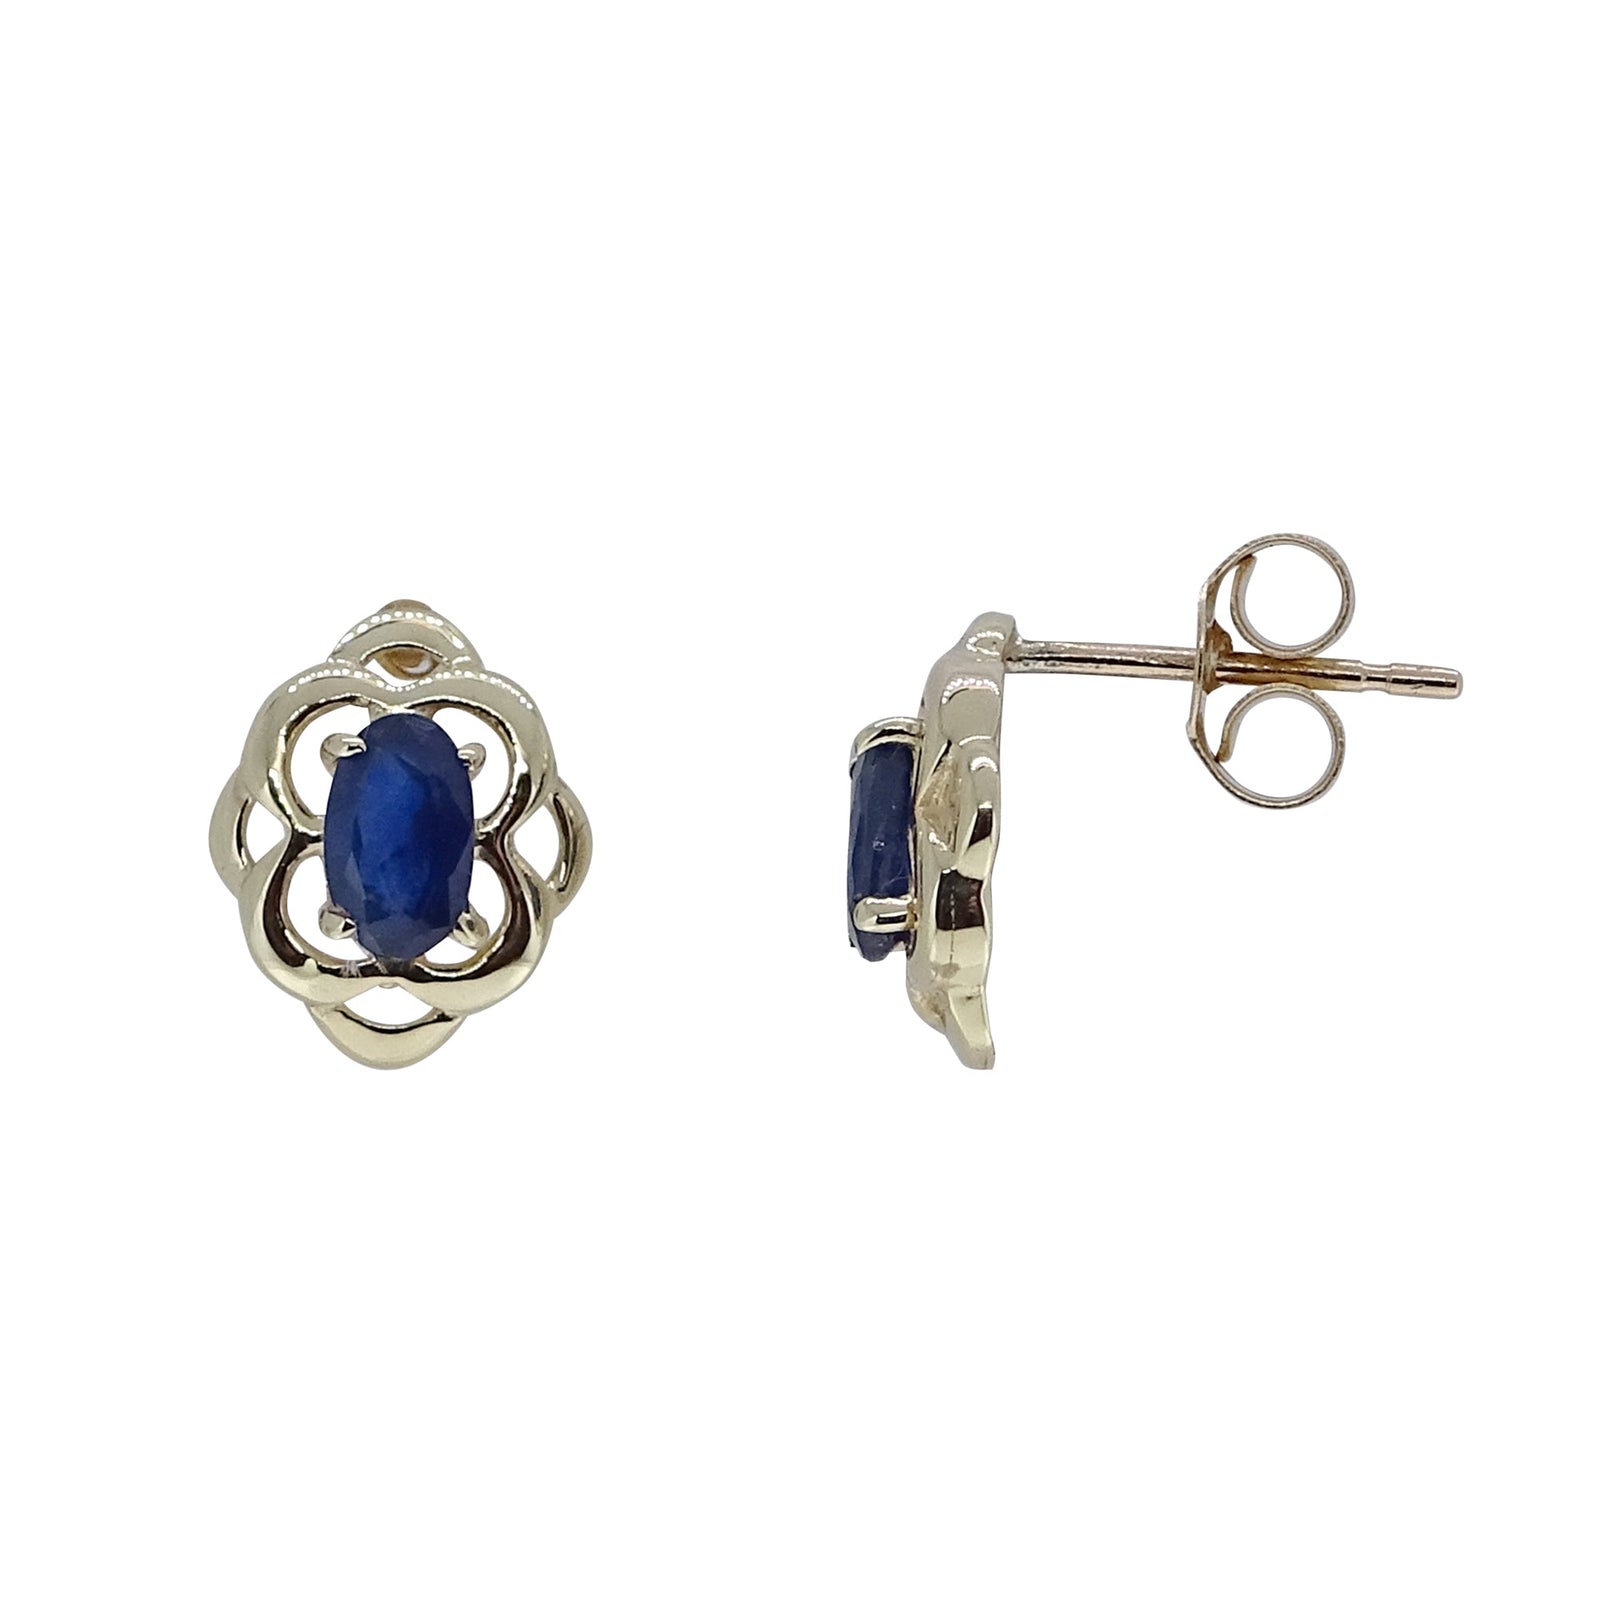 9ct gold celtic style 5x3mm oval sapphire stud earrings